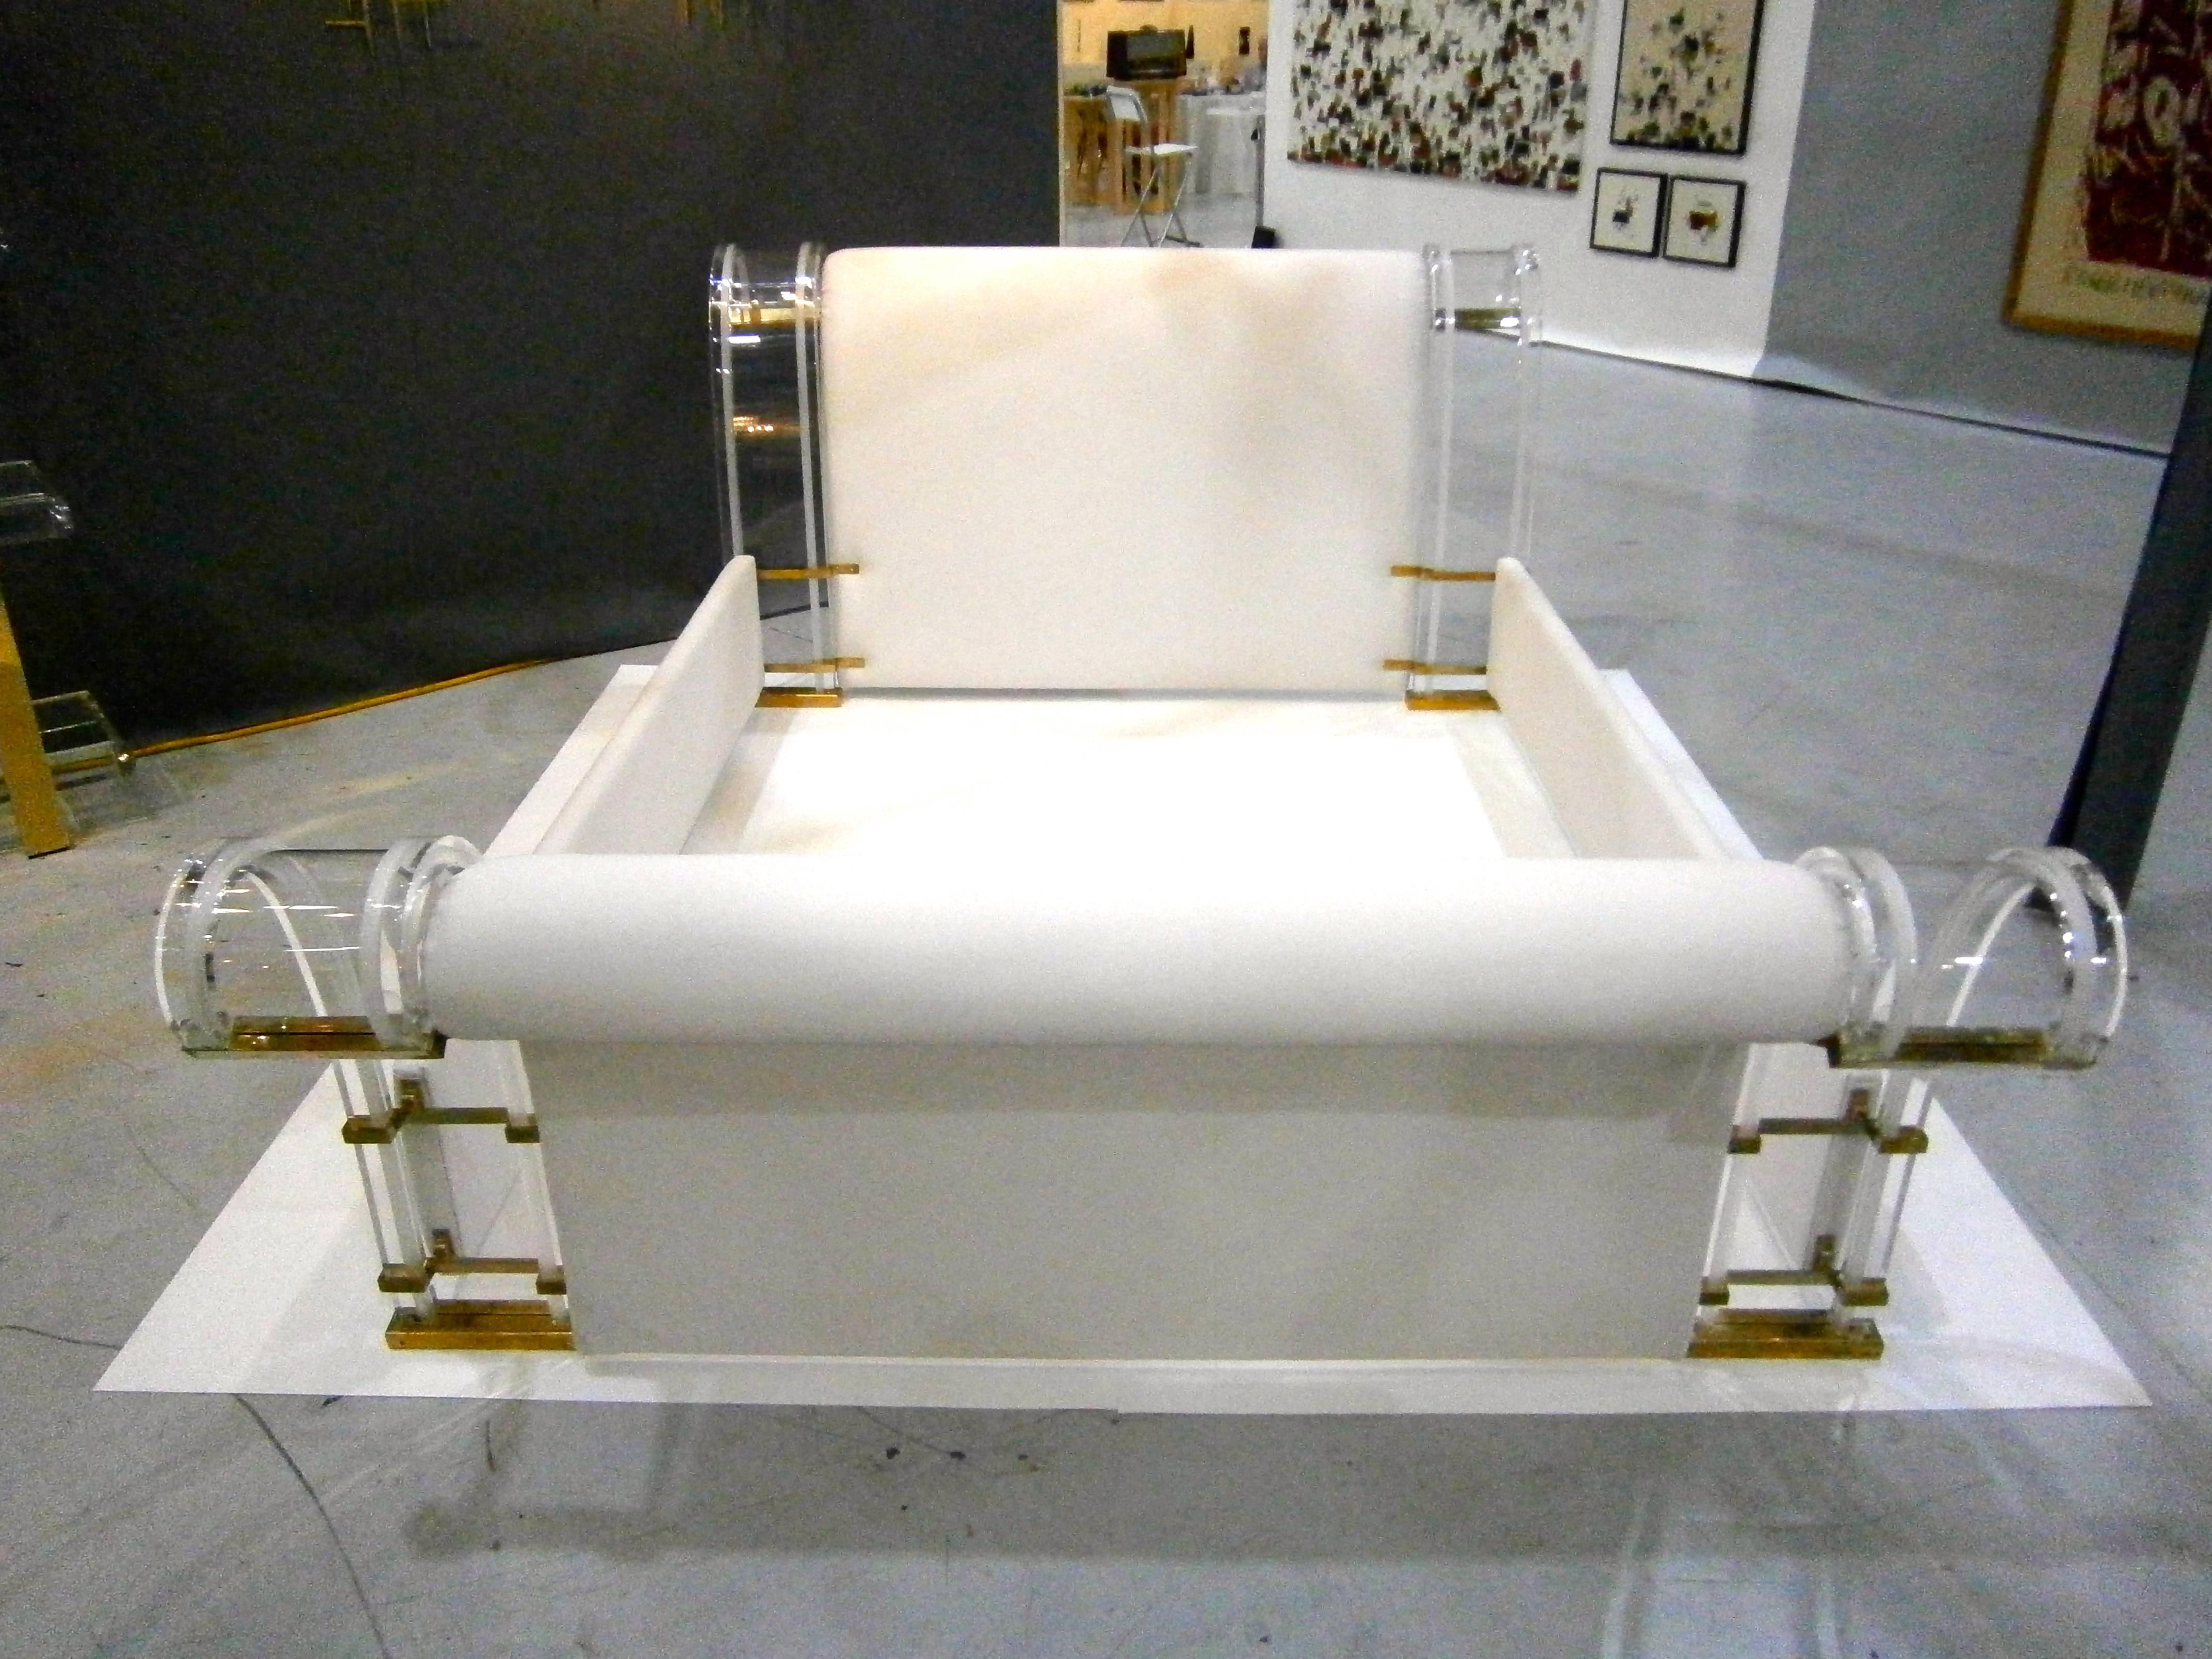 Amazing Brass and Lucite Queen-Sized Sleigh Bed by Marcello Mioni, circa 1980 For Sale 1